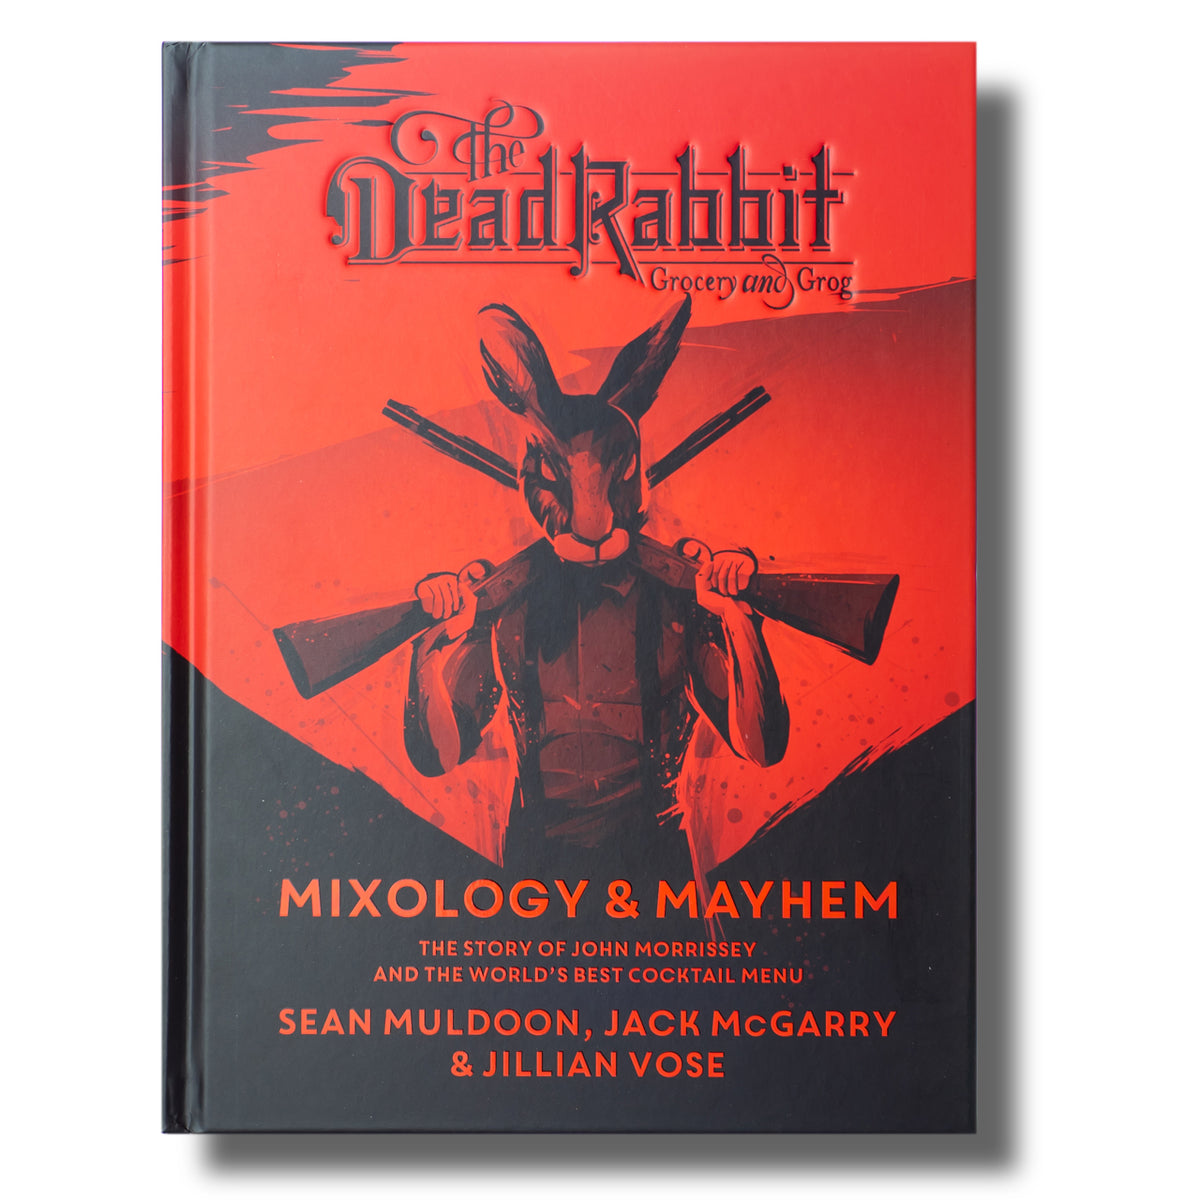 The Dead Rabbit Mixology and Mayhem: The Story of John Morrissey and the World's Best Cocktail Menu [Book]